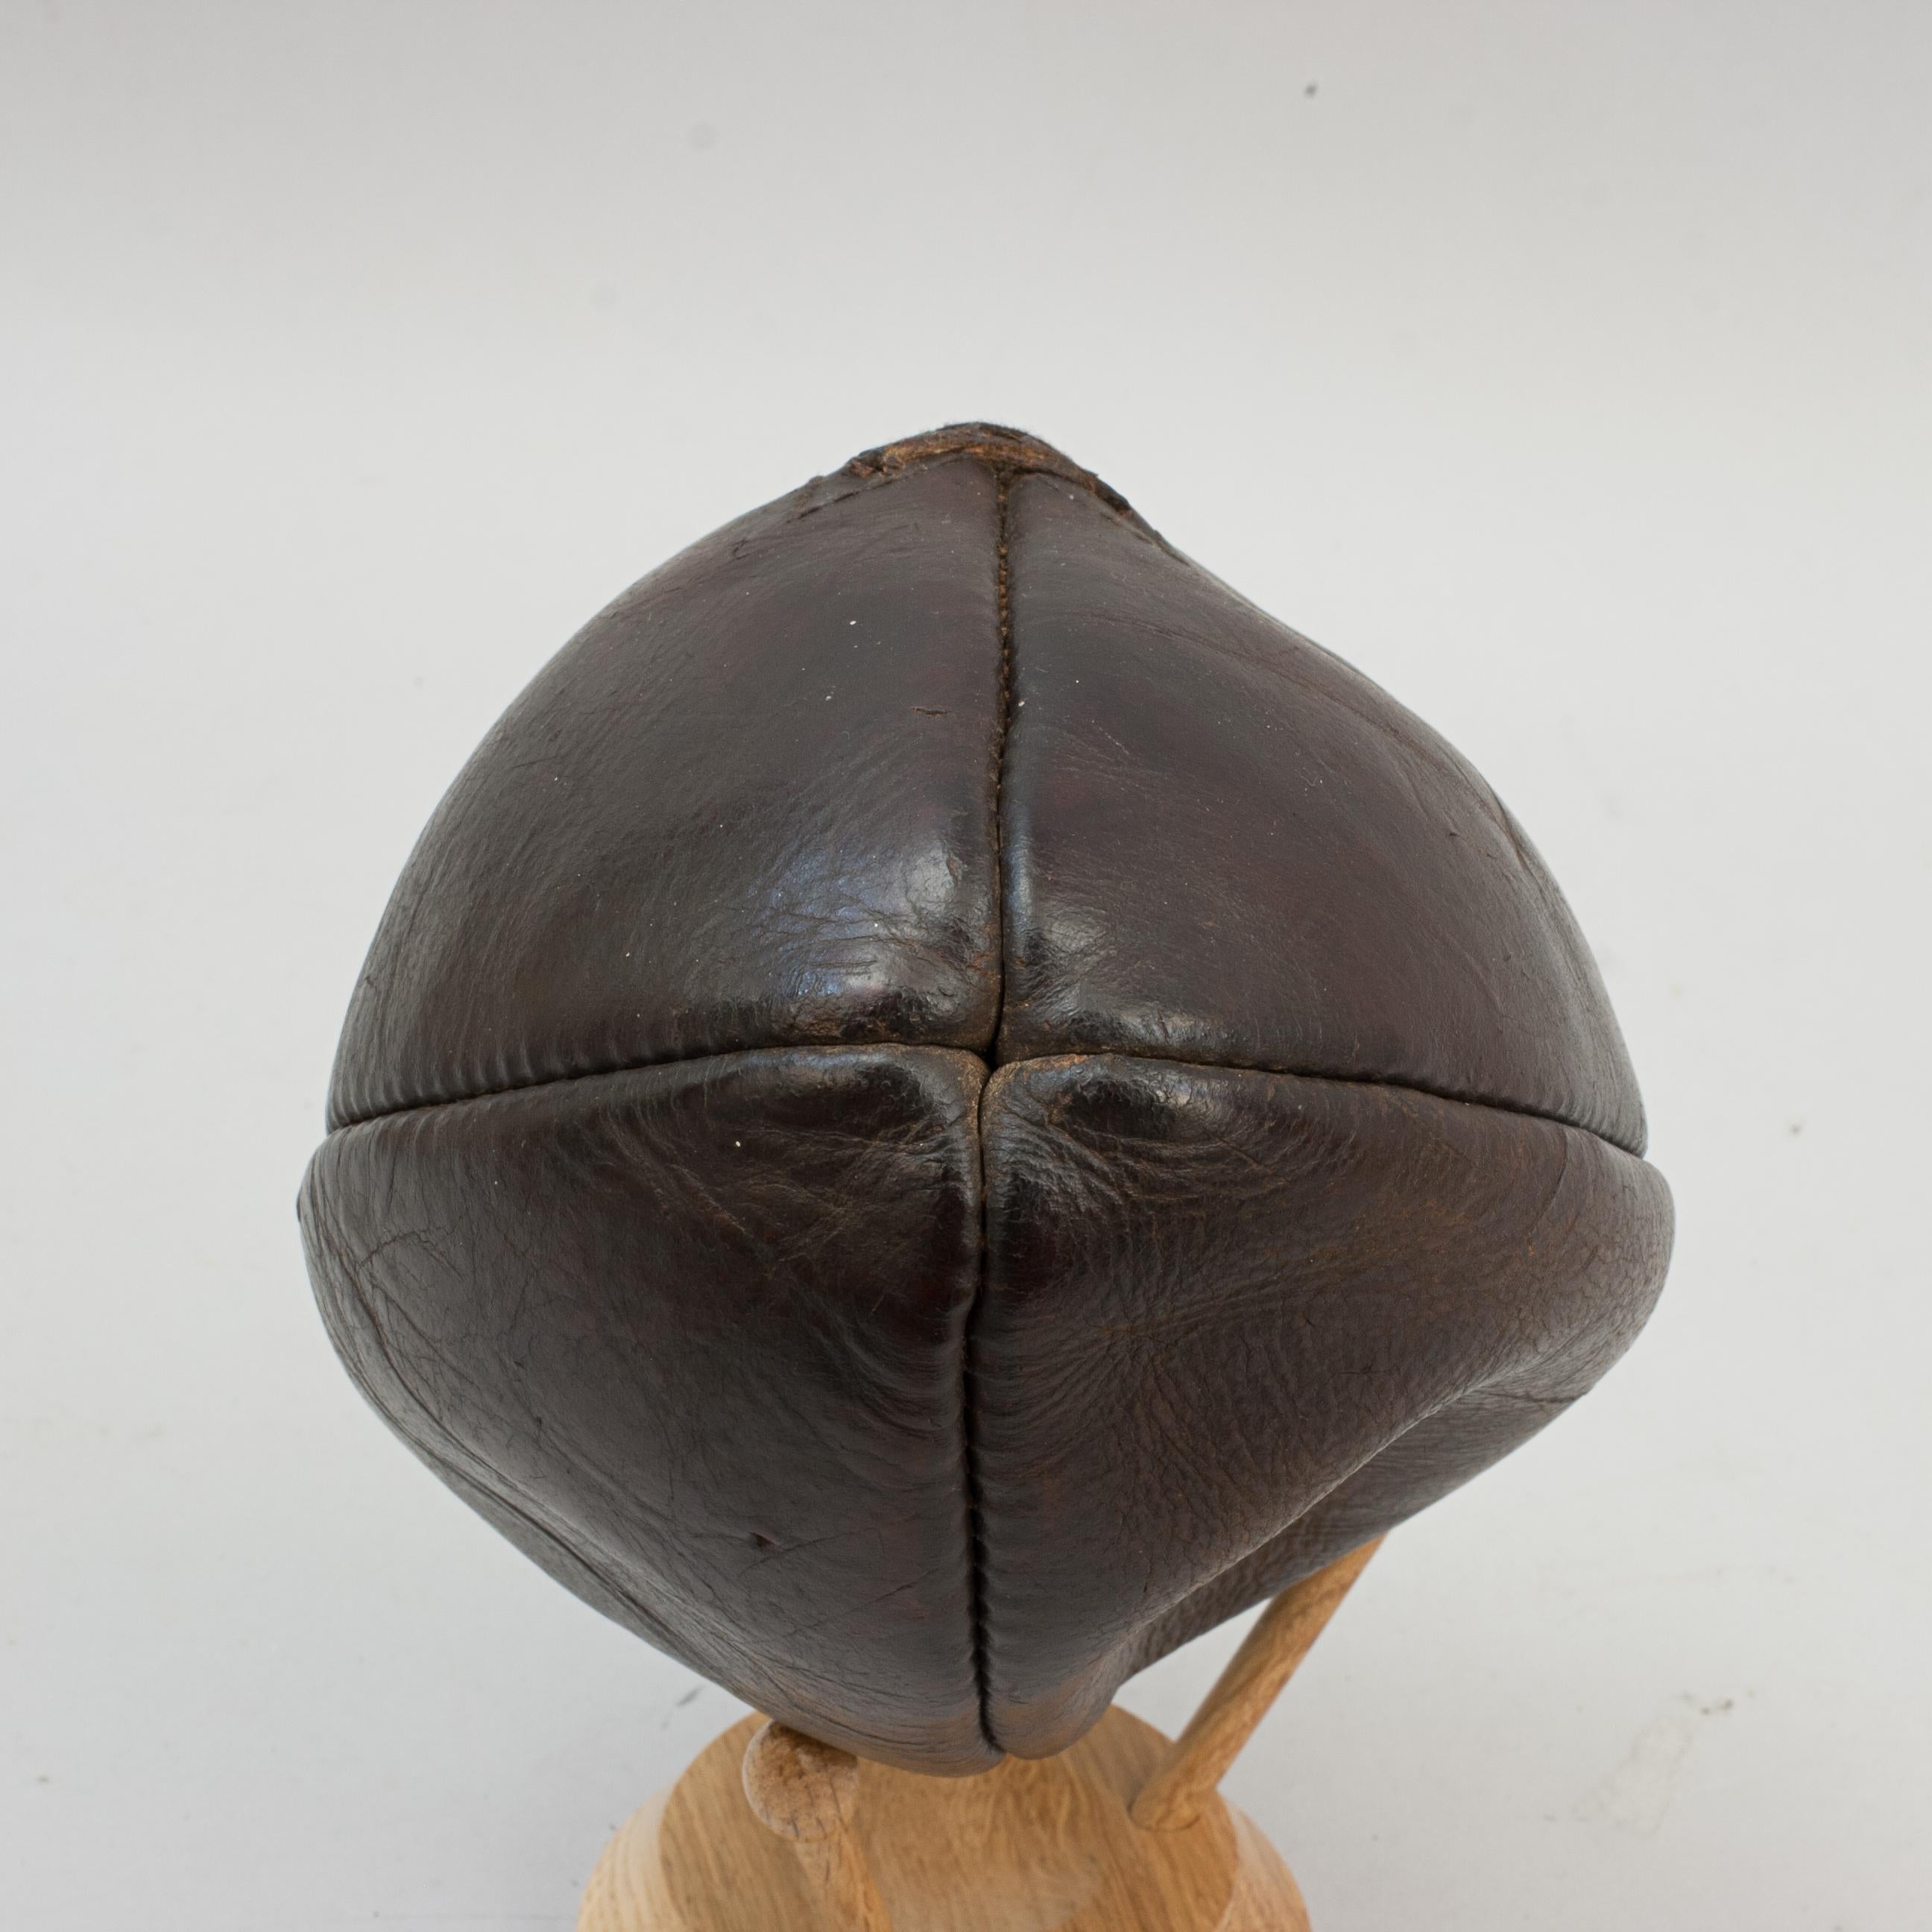 Original Antique Leather Rugby Ball. 1